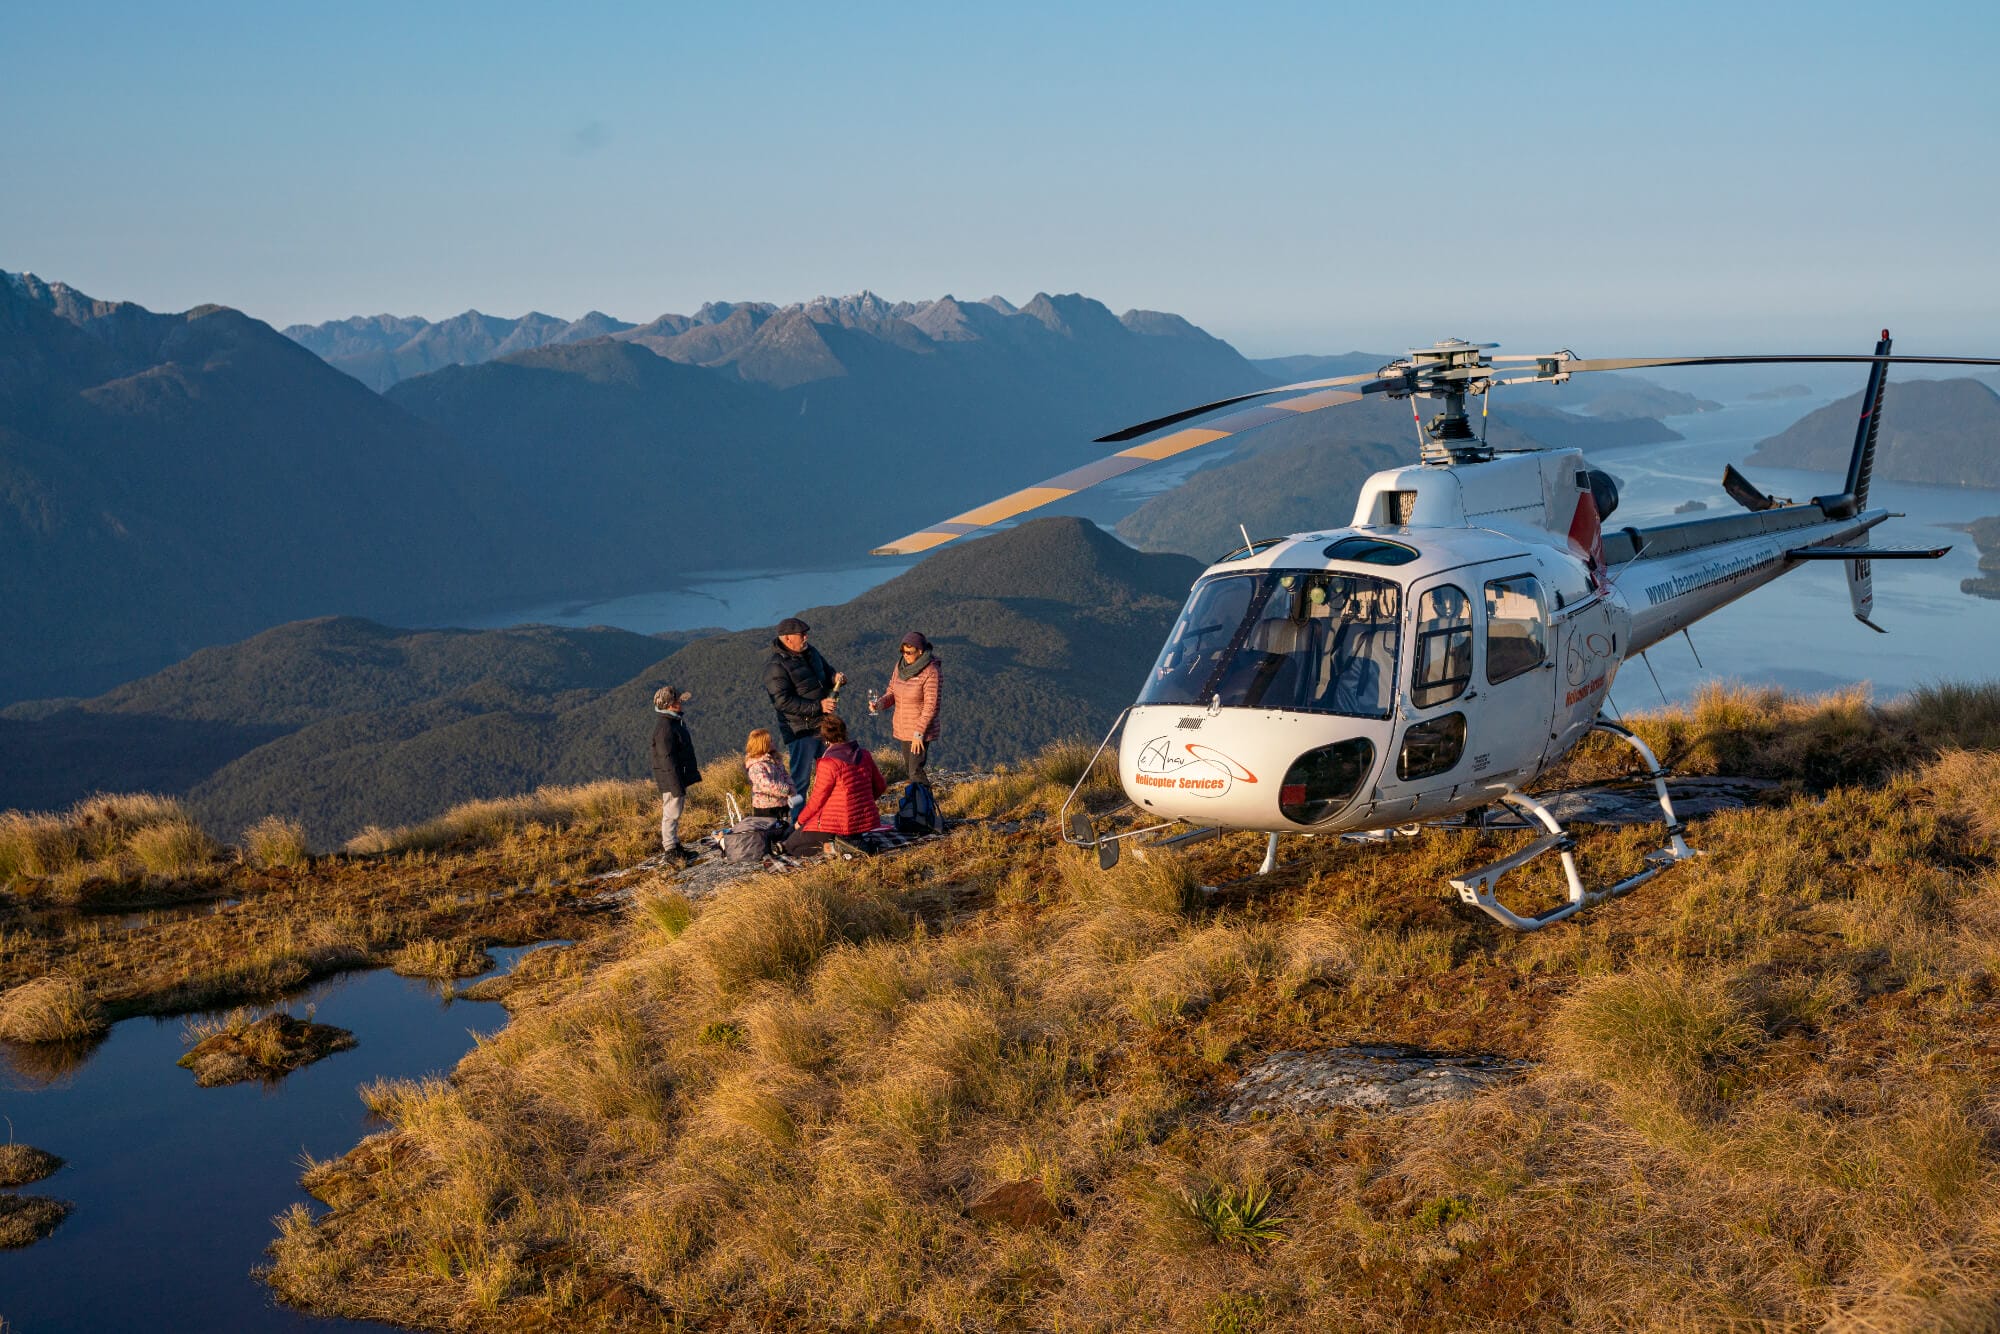 A group of people sitting near a helicopter on a mountain summit, with panoramic views of distant mountains and a lake.